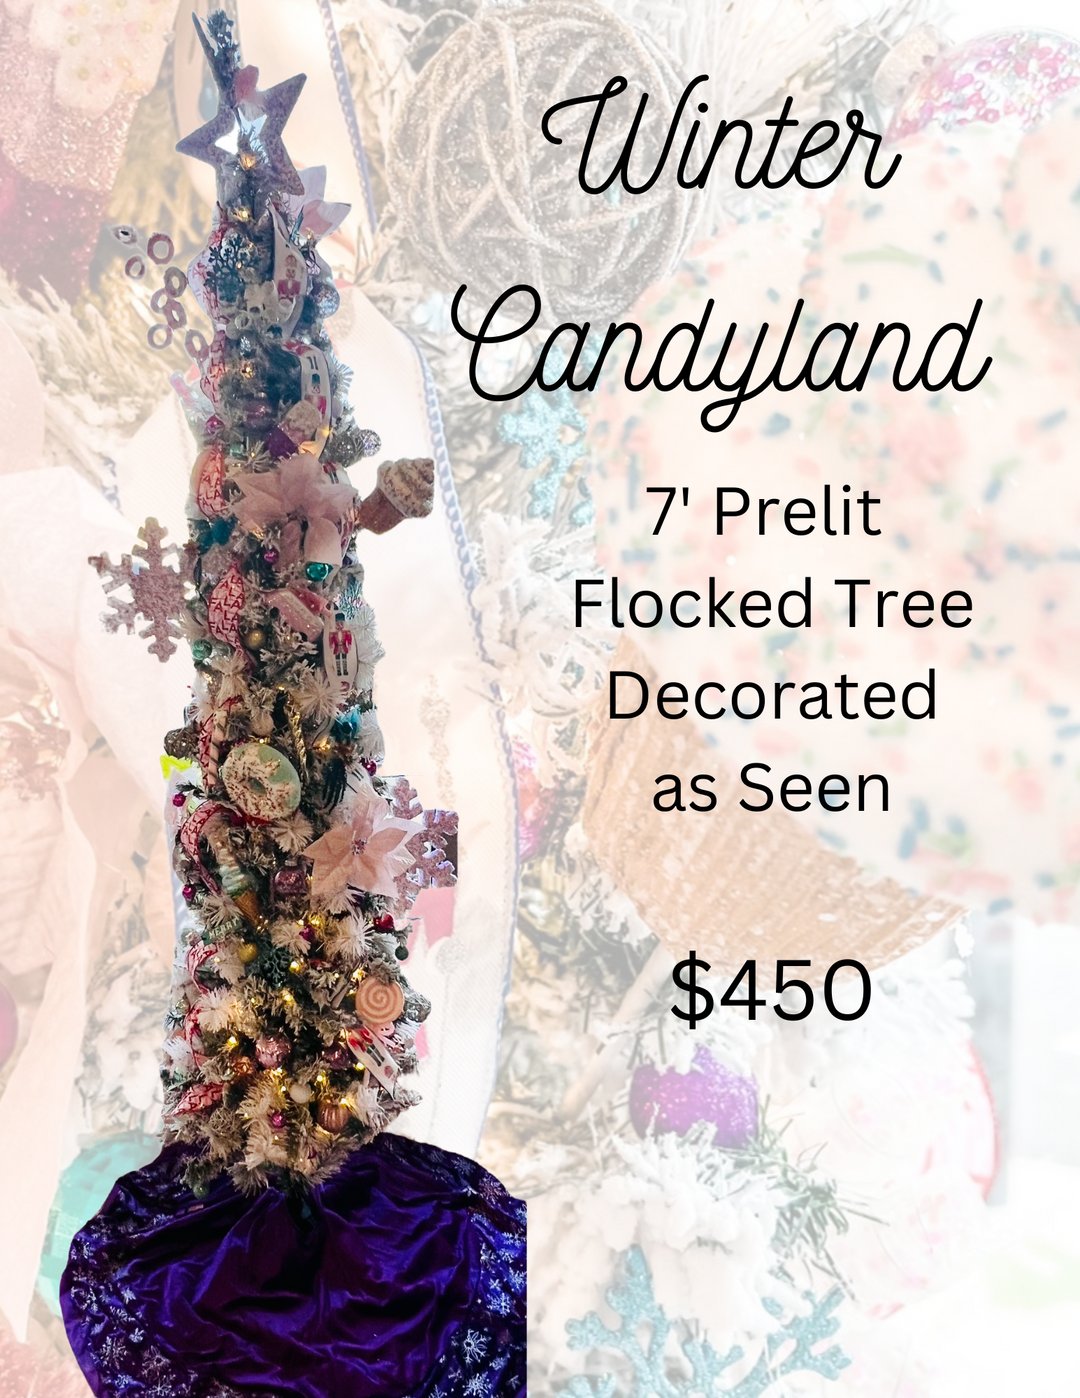 Winter Candyland Decorated Tree - The Teal Antler Boutique